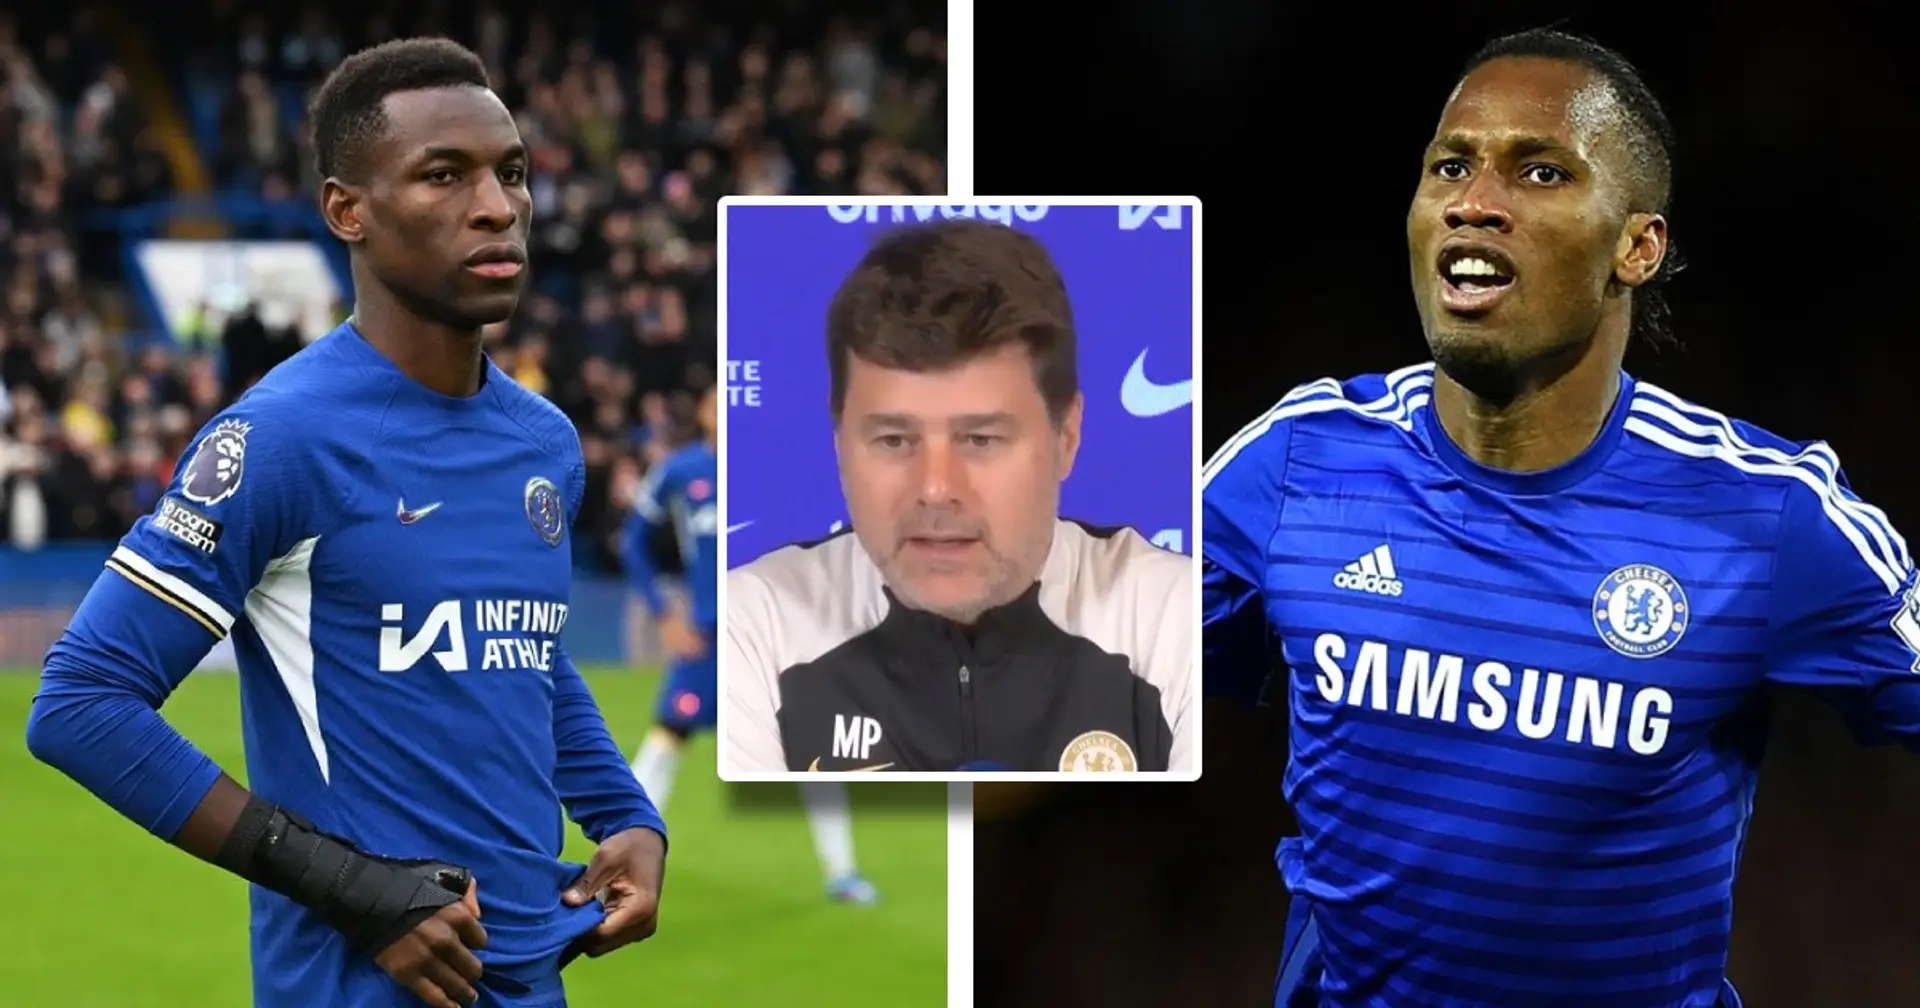 Pochettino: 'Jackson gets criticism because he gets compared to Drogba'